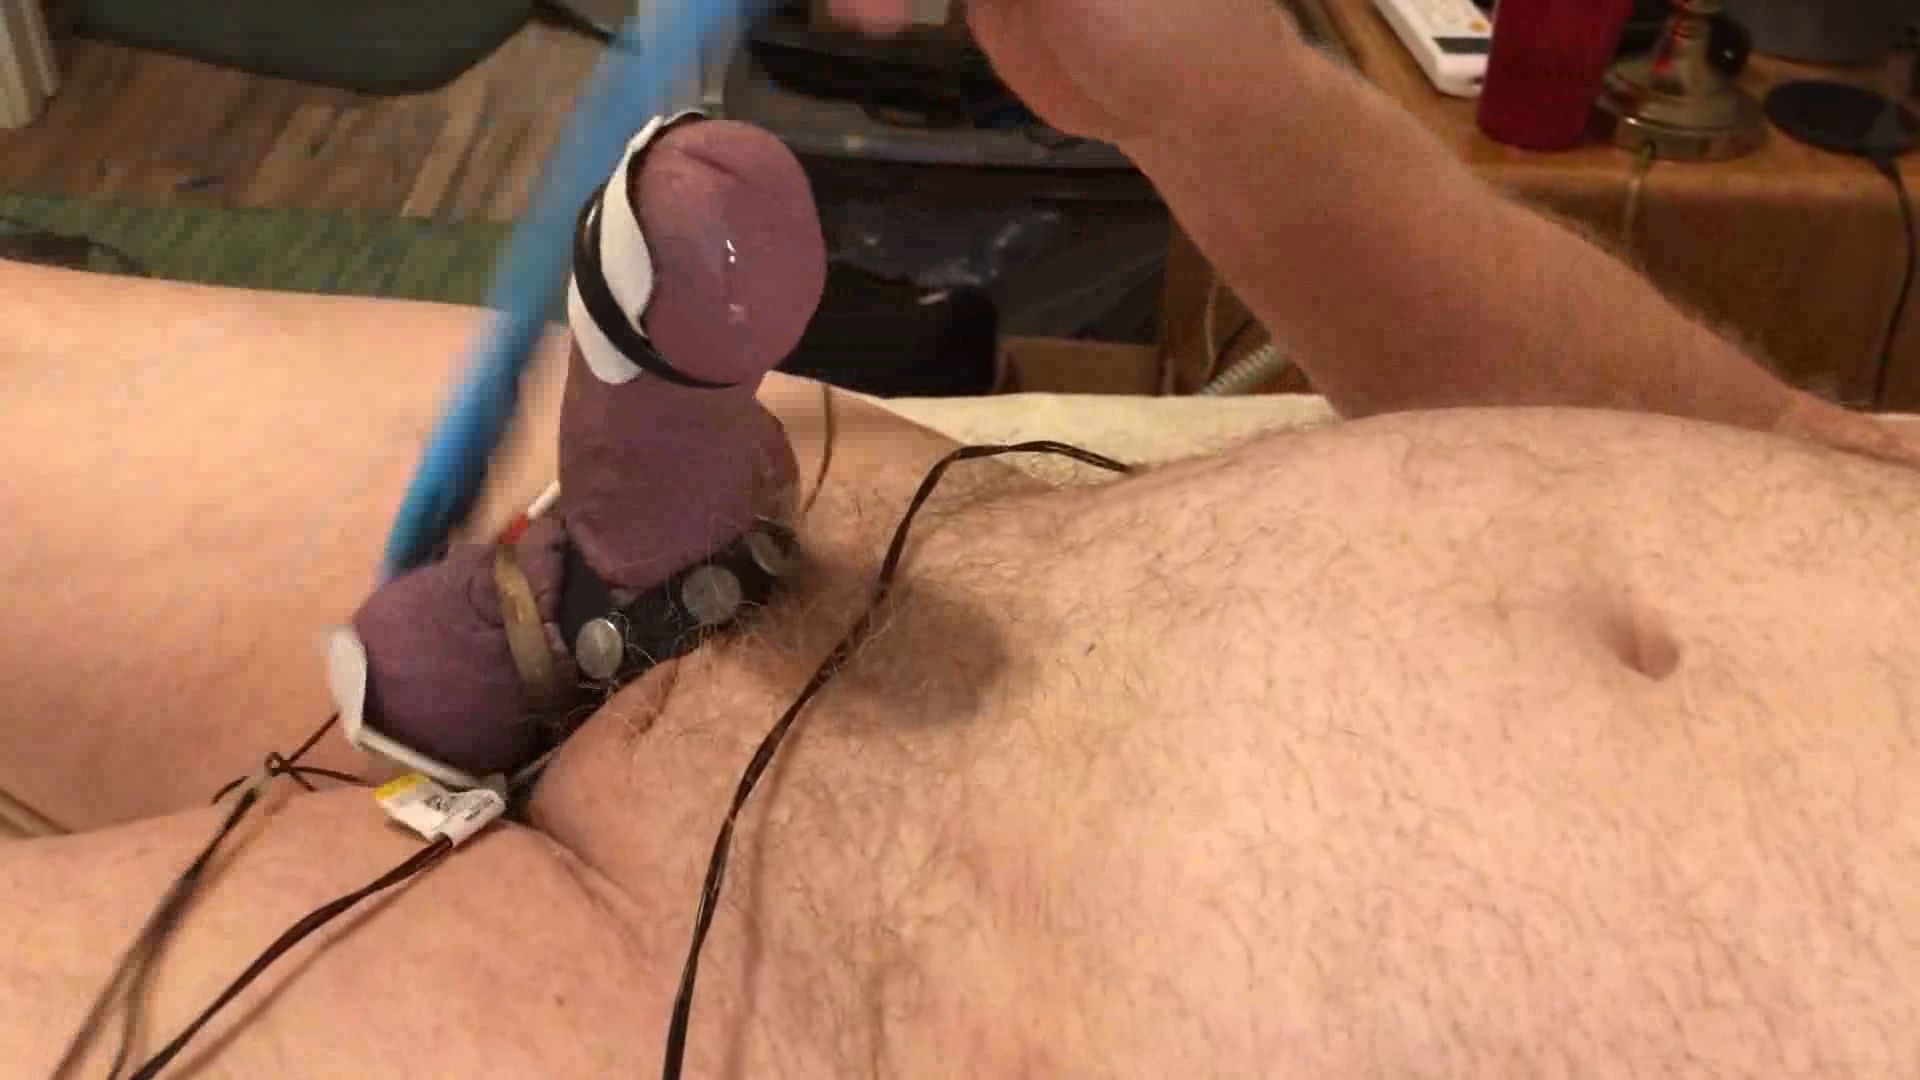 Cock twitches with estim pulse and precum flows as I slap an #46